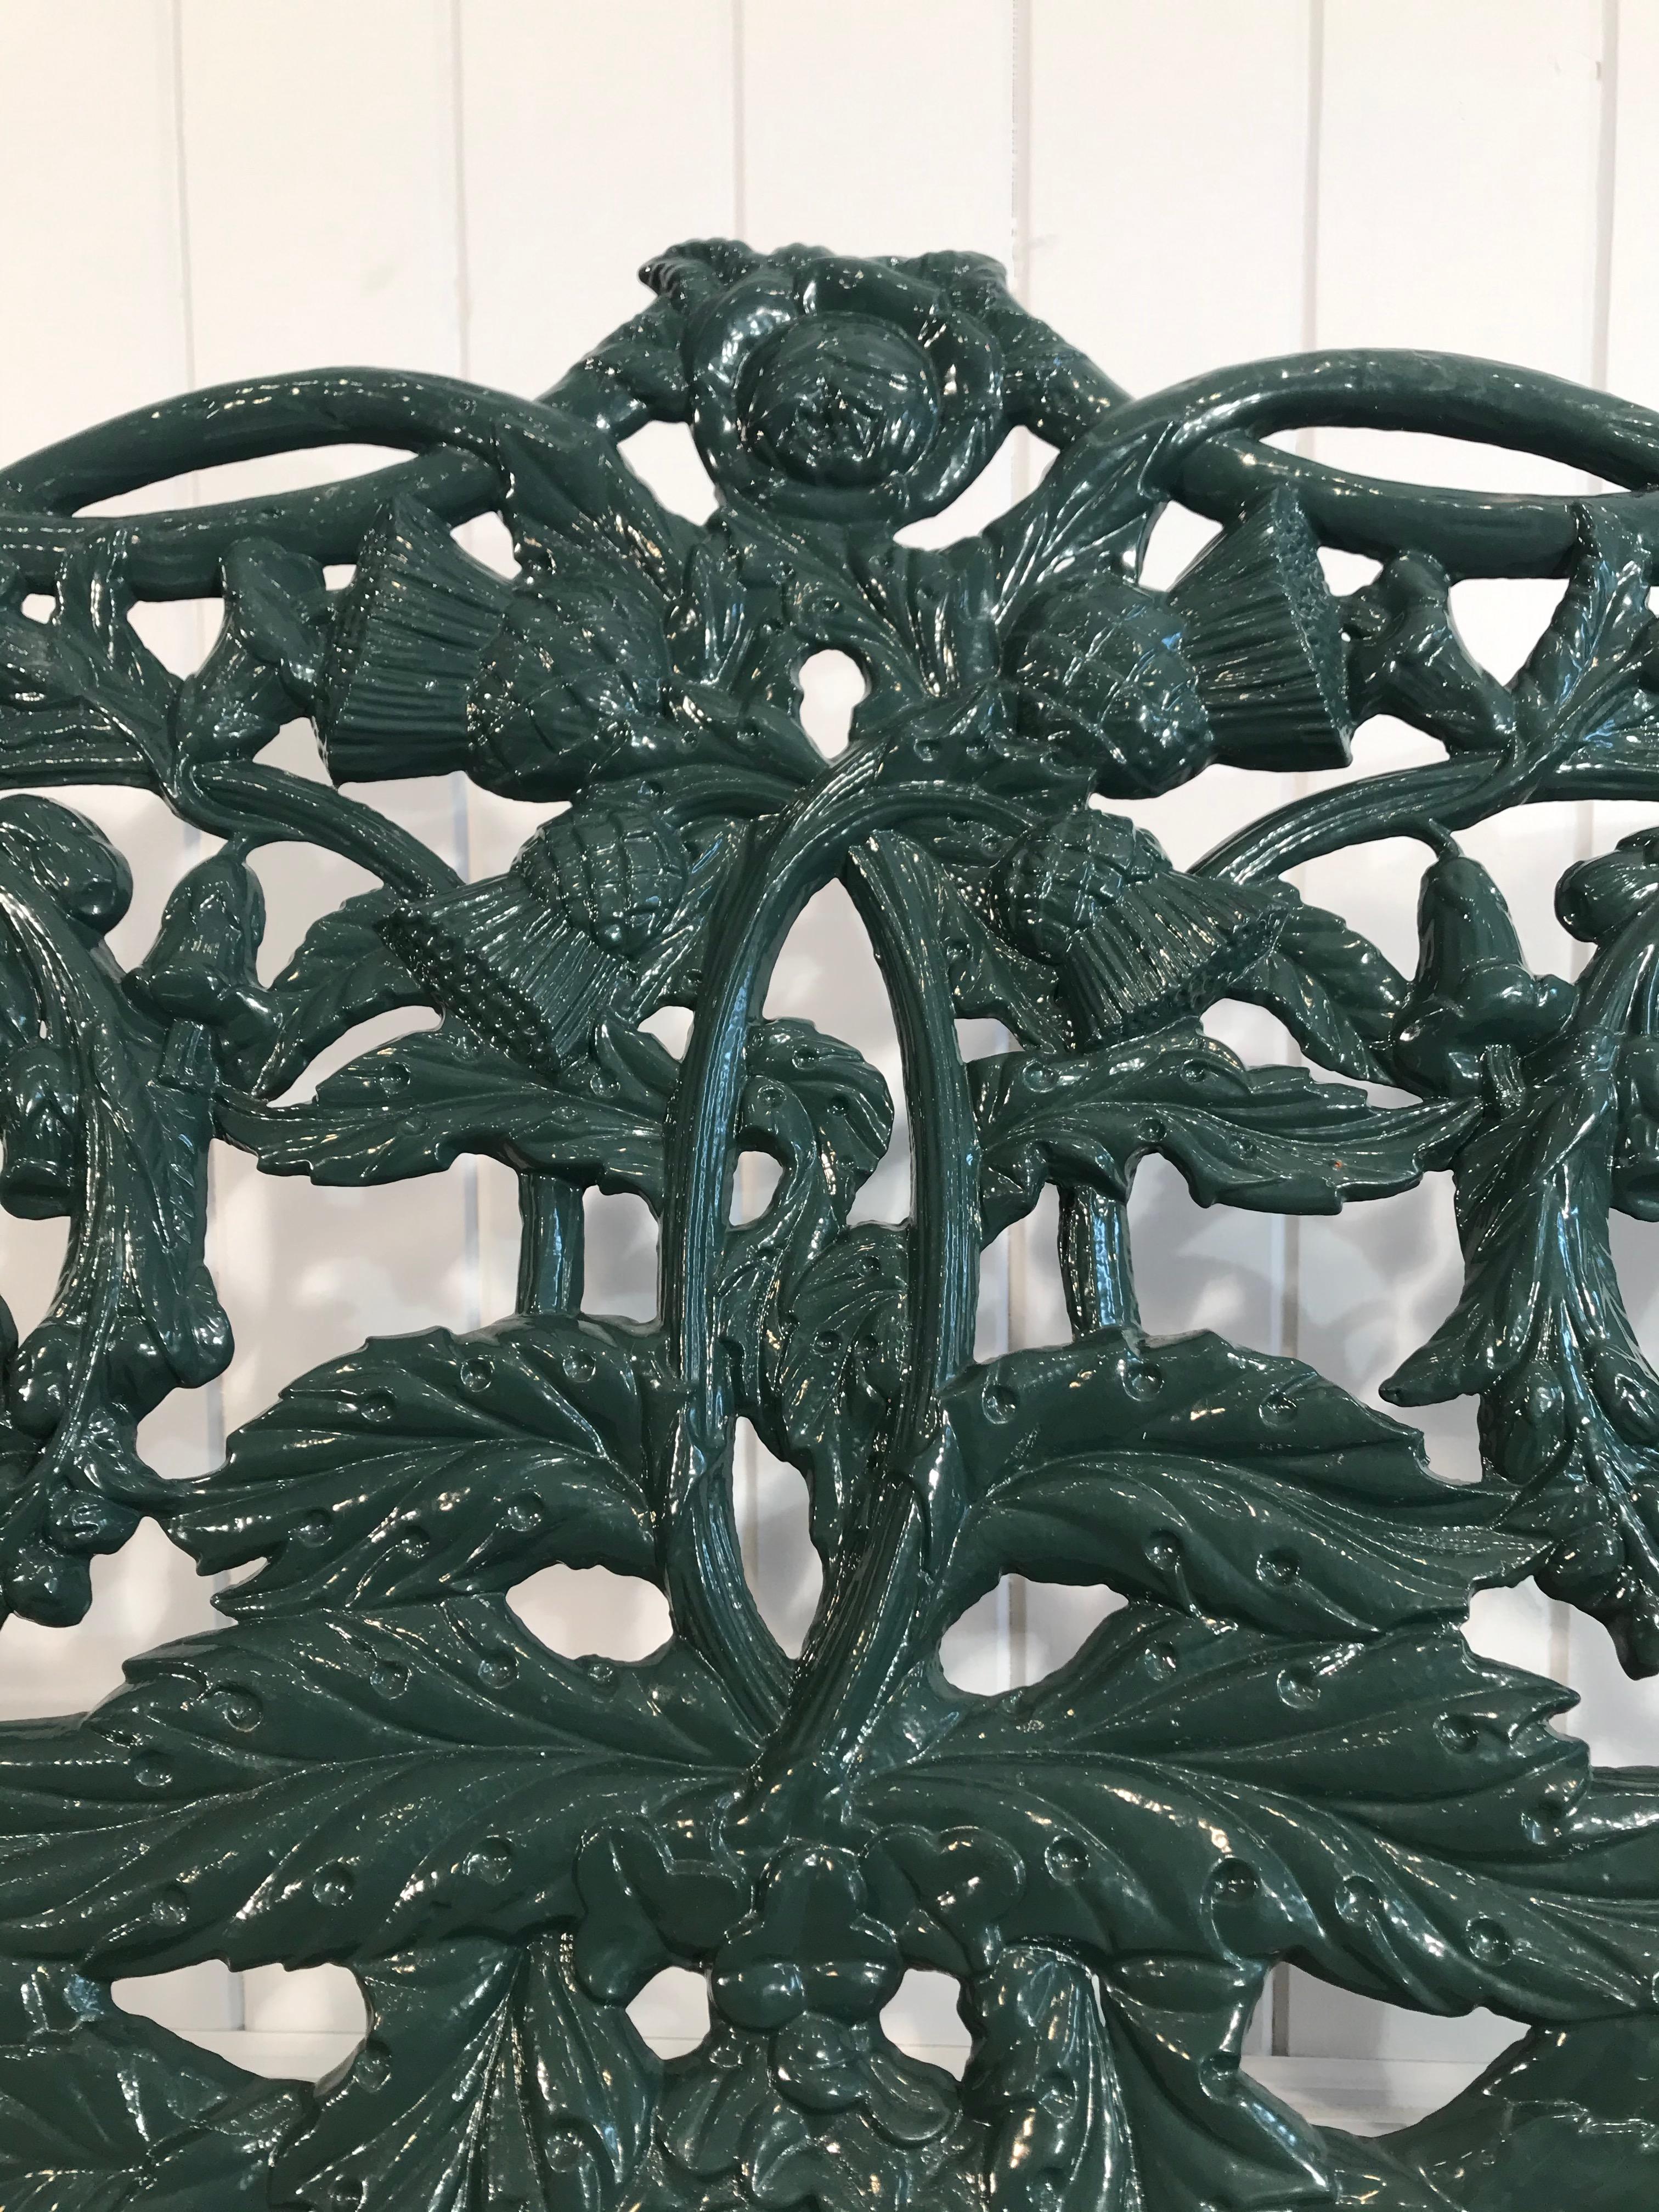 Rose and Thistle Cast Iron Bench by T. Perry and Sons, Glasgow, 1858 For Sale 3